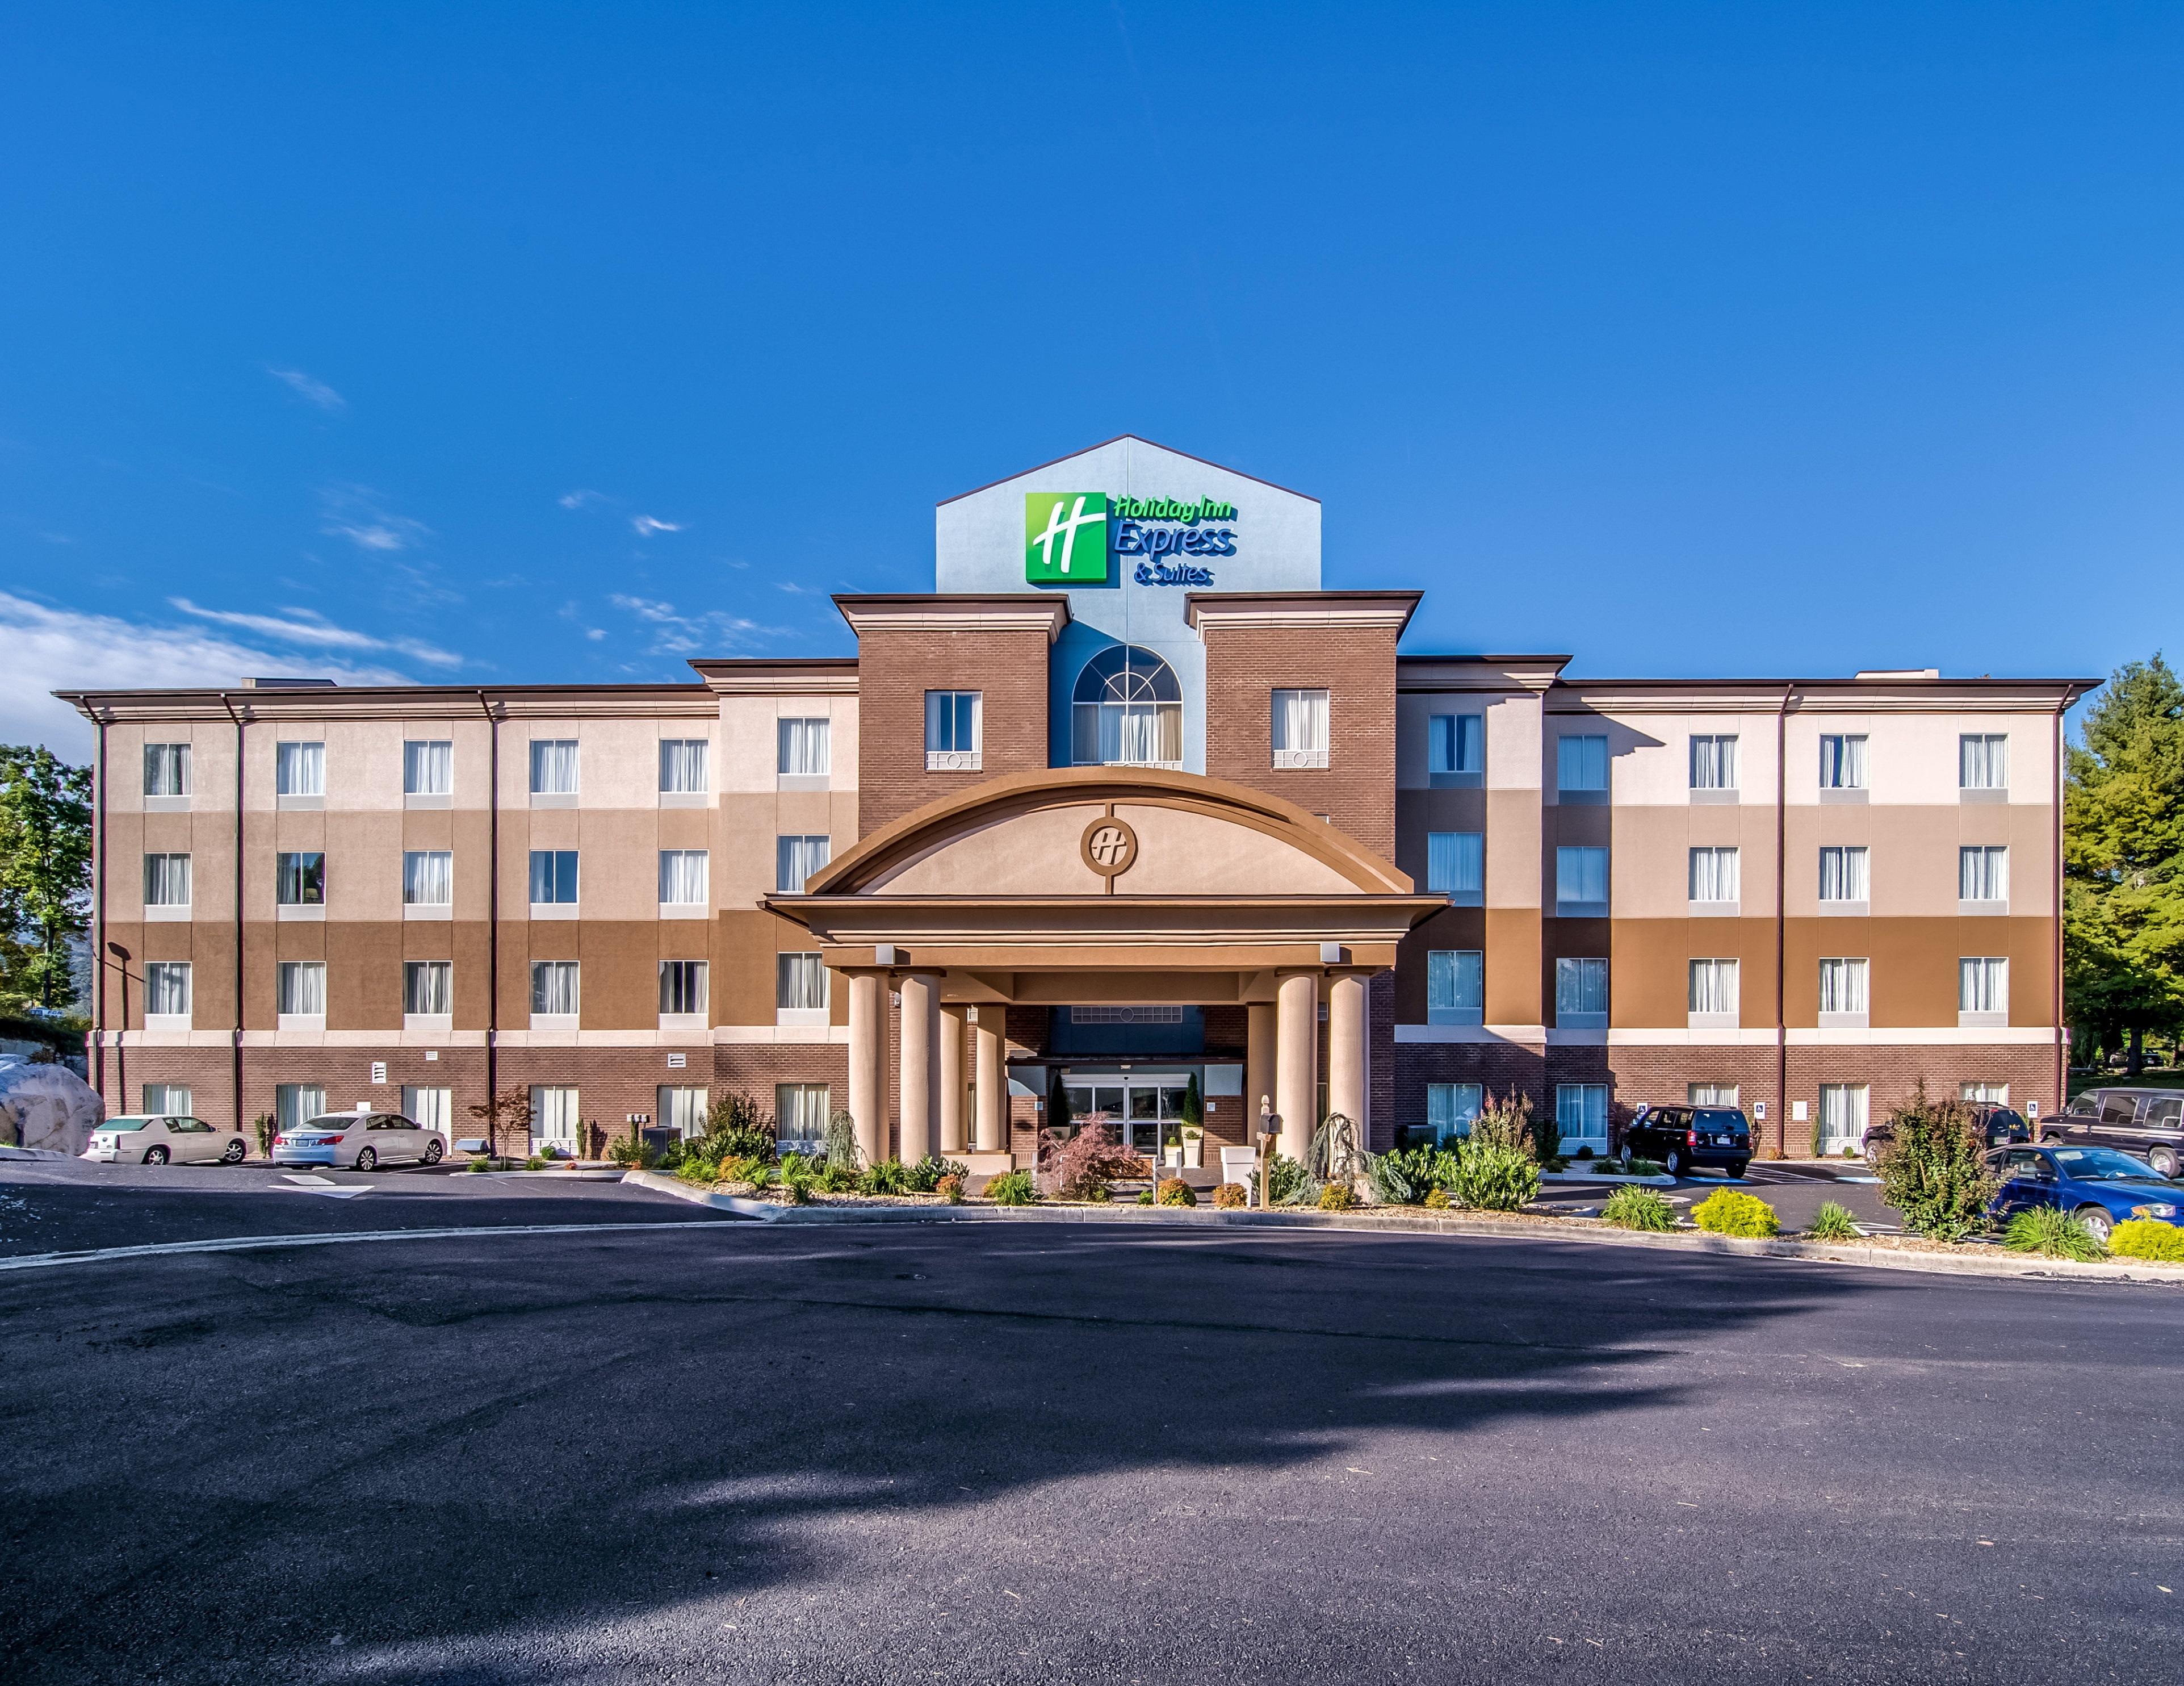 Holiday Inn® Hotels - Book Family Friendly Hotels Worldwide - Official Site